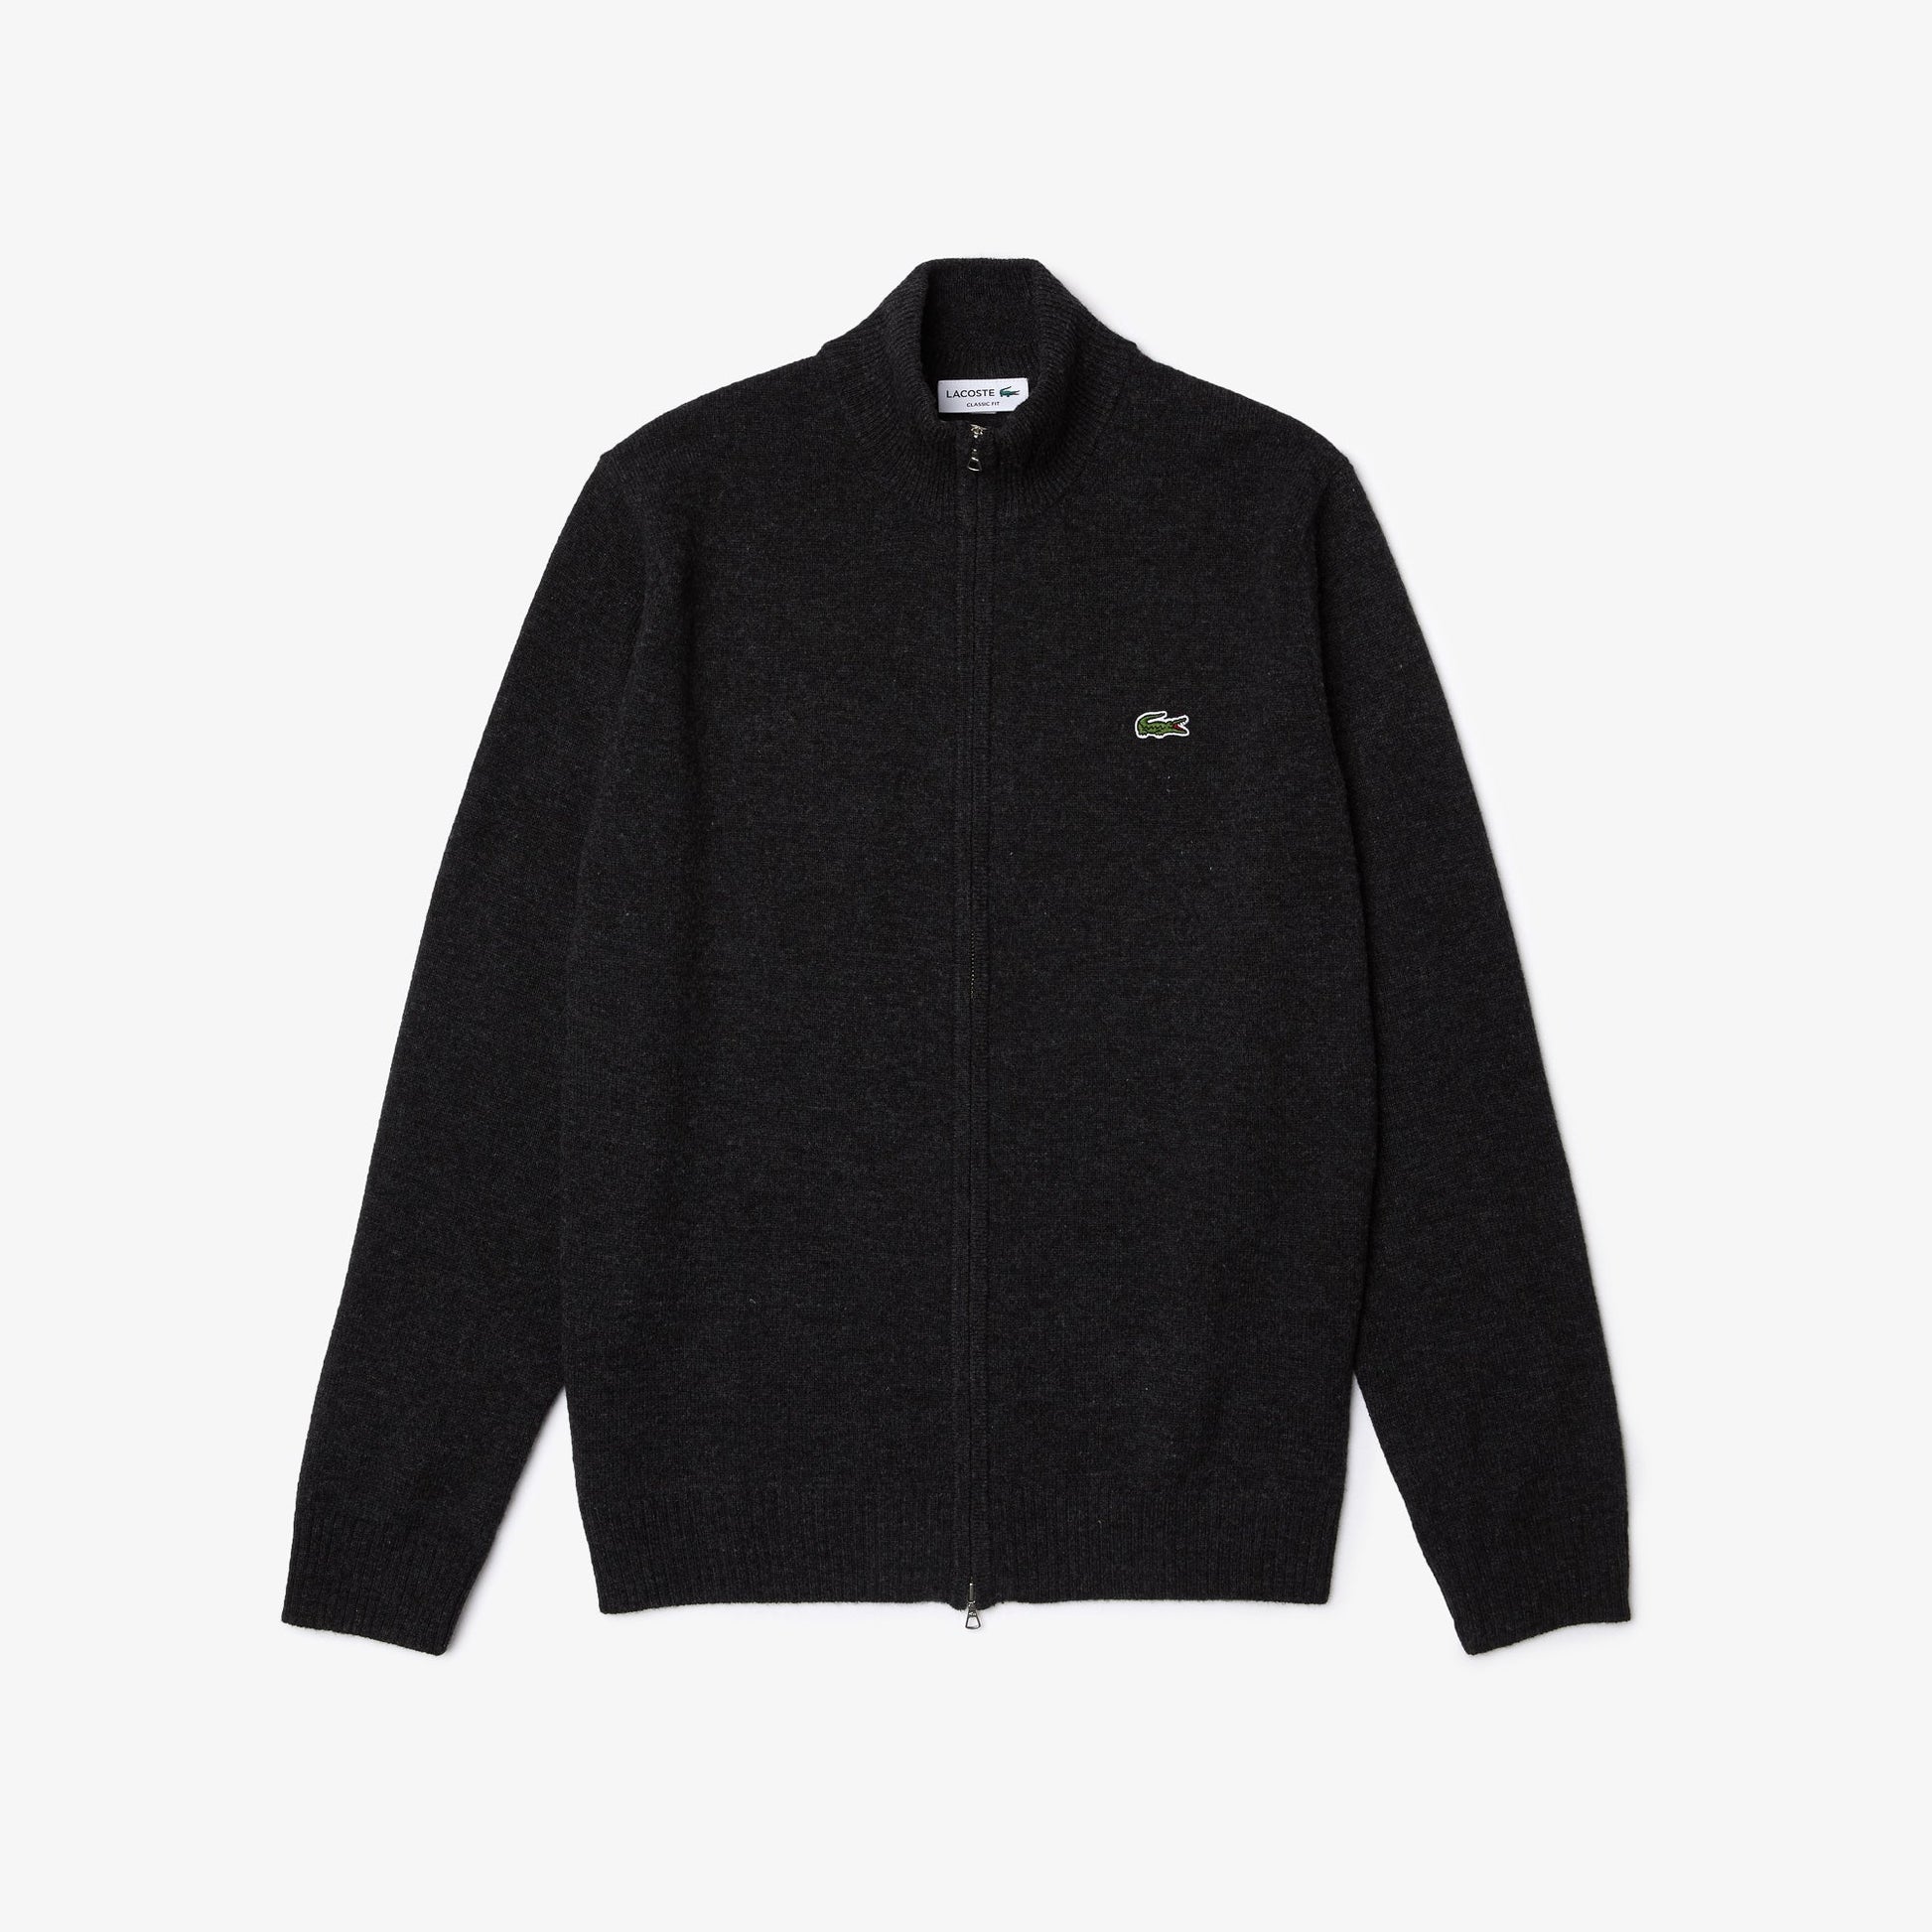 Shop The Latest Collection Of Lacoste Men'S High Neck Wool Zip Cardigan - Ah1945 In Lebanon